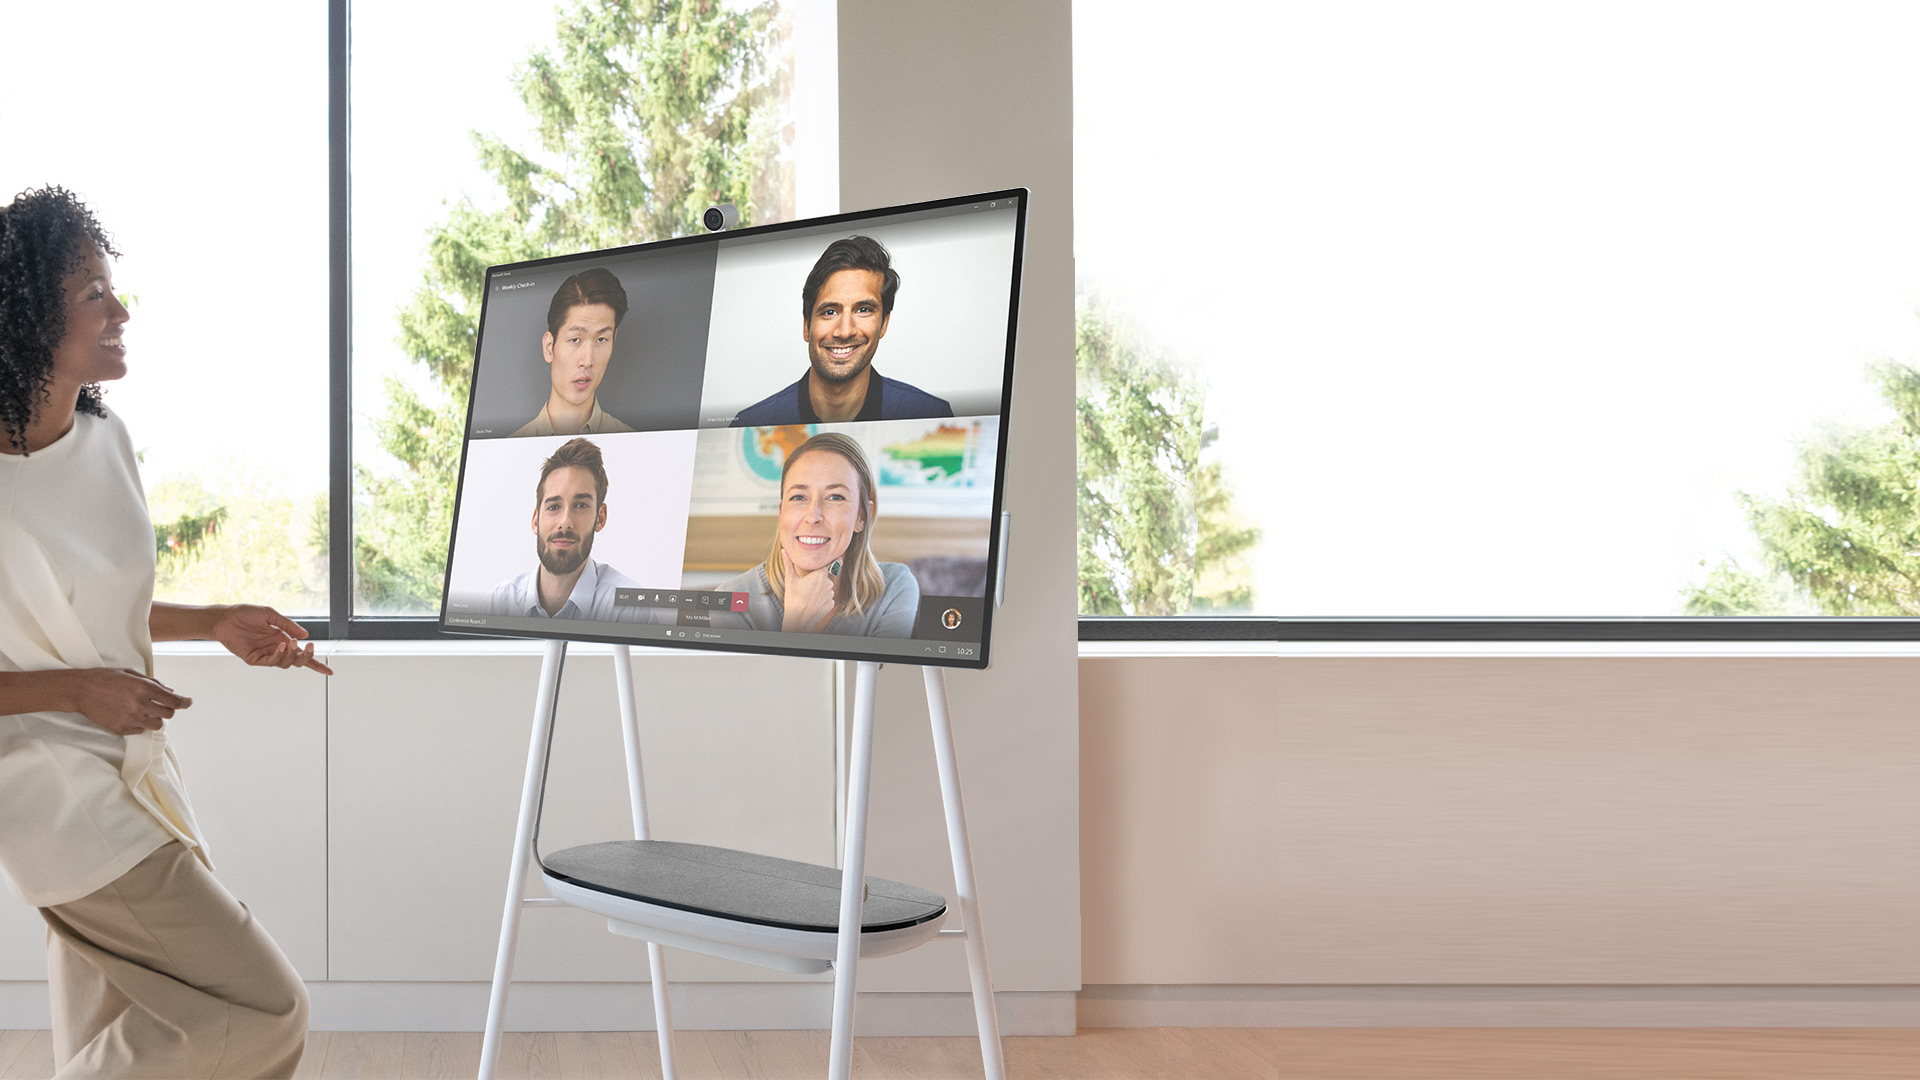 RE2OLZV - Surface Hub 2S, an all-in-one digital interactive whiteboard fosters team collaboration.